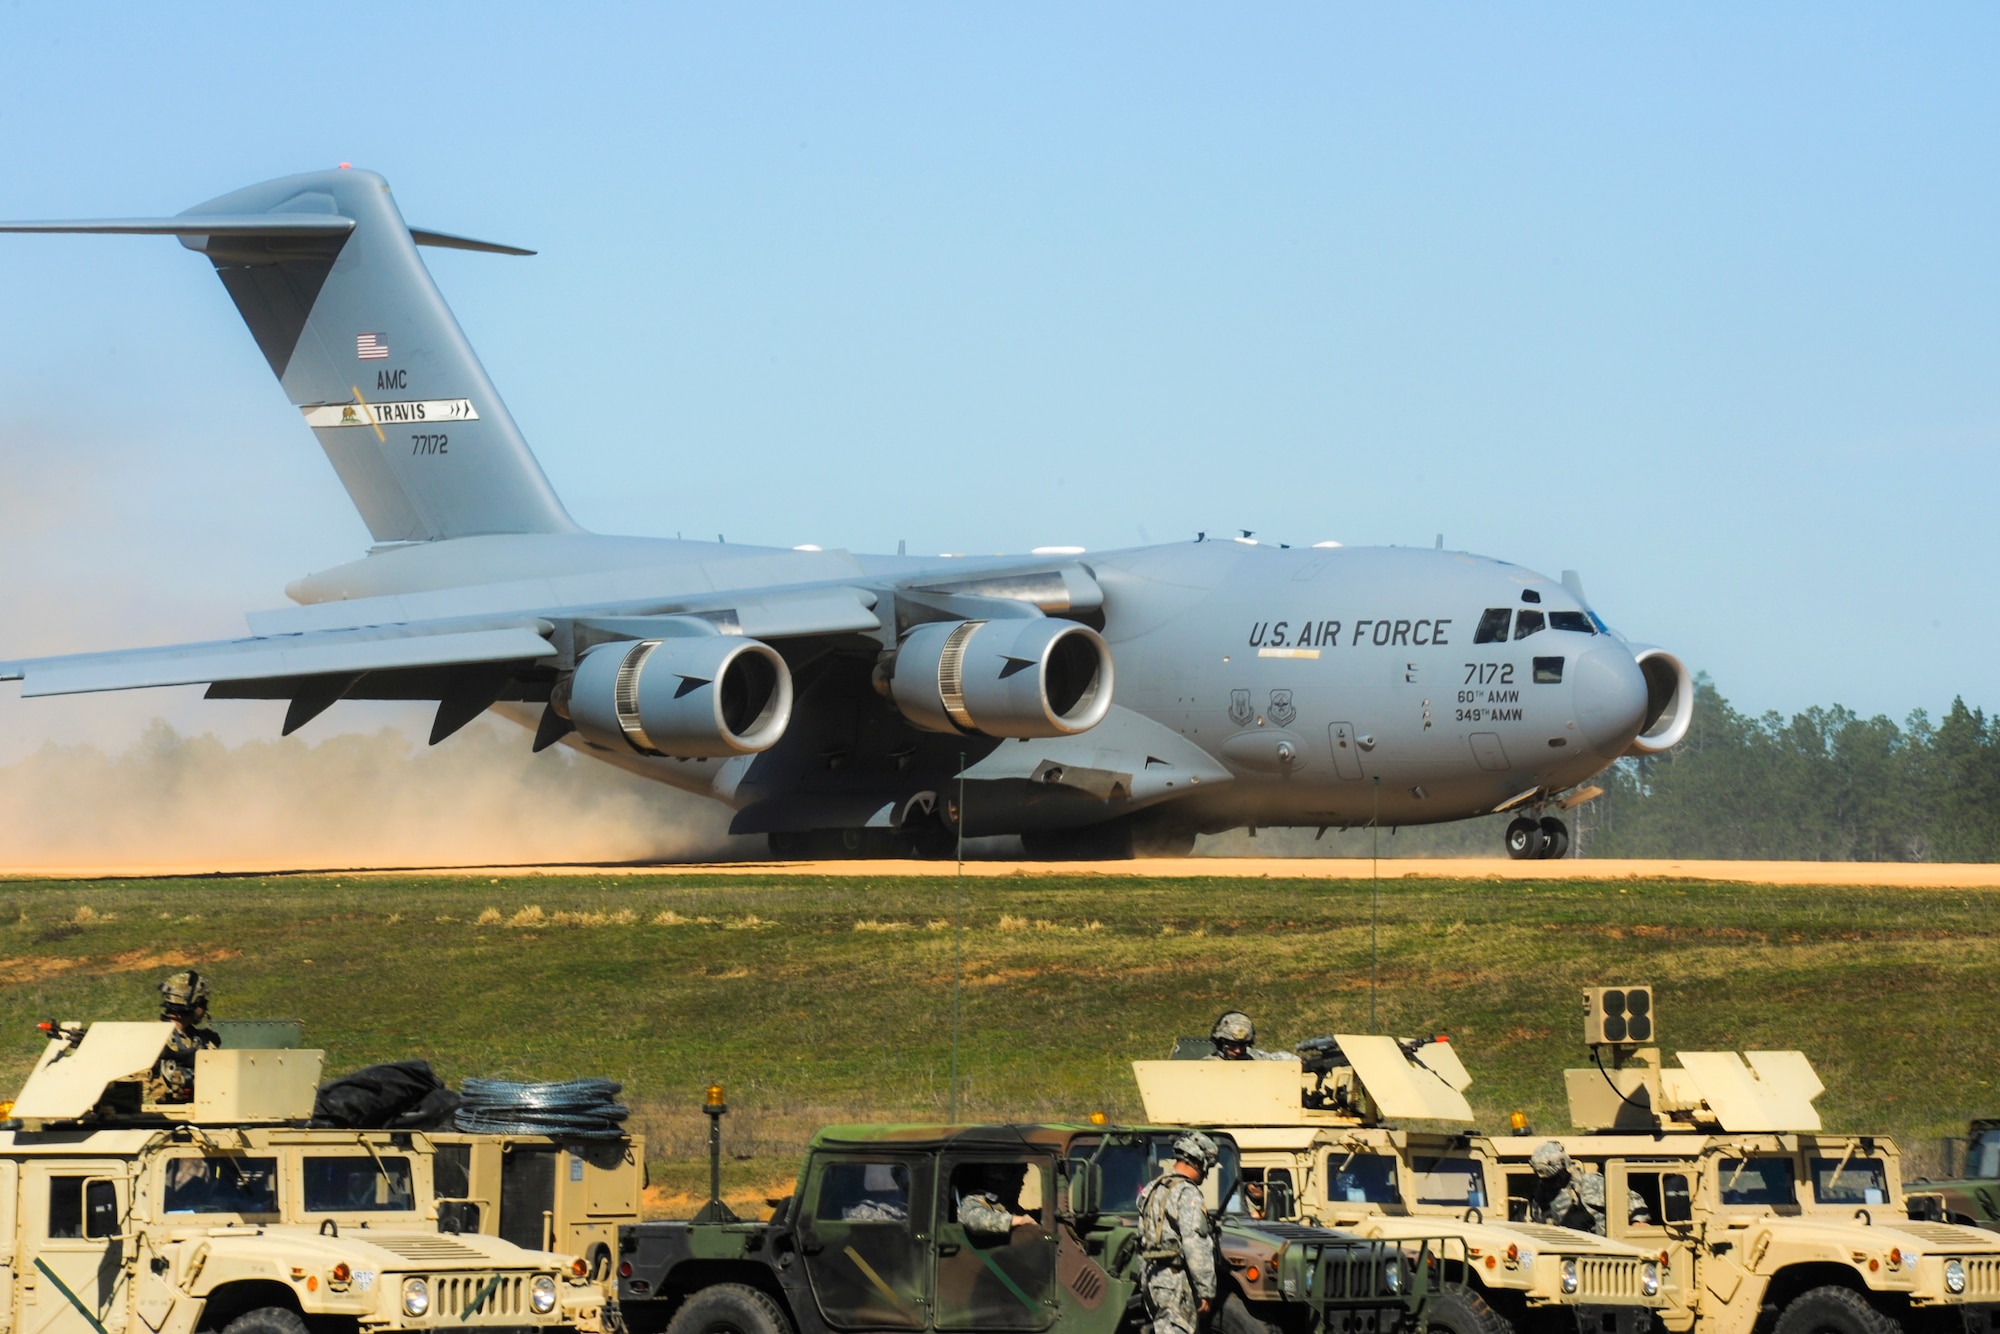 A U.S. Air Force C-17 Globemaster lands at the Geronimo Landing Zone during GREEN FLAG 16-04 on Fort Polk, La., Feb. 17, 2016. Green Flag exercises provide Airmen, Soldiers, Marines and NATO members with the most realistic, tactical-level, joint combat employment training tailored to mobility Air Force needs. (U.S. Air Force photo/Senior Airman Harry Brexel)